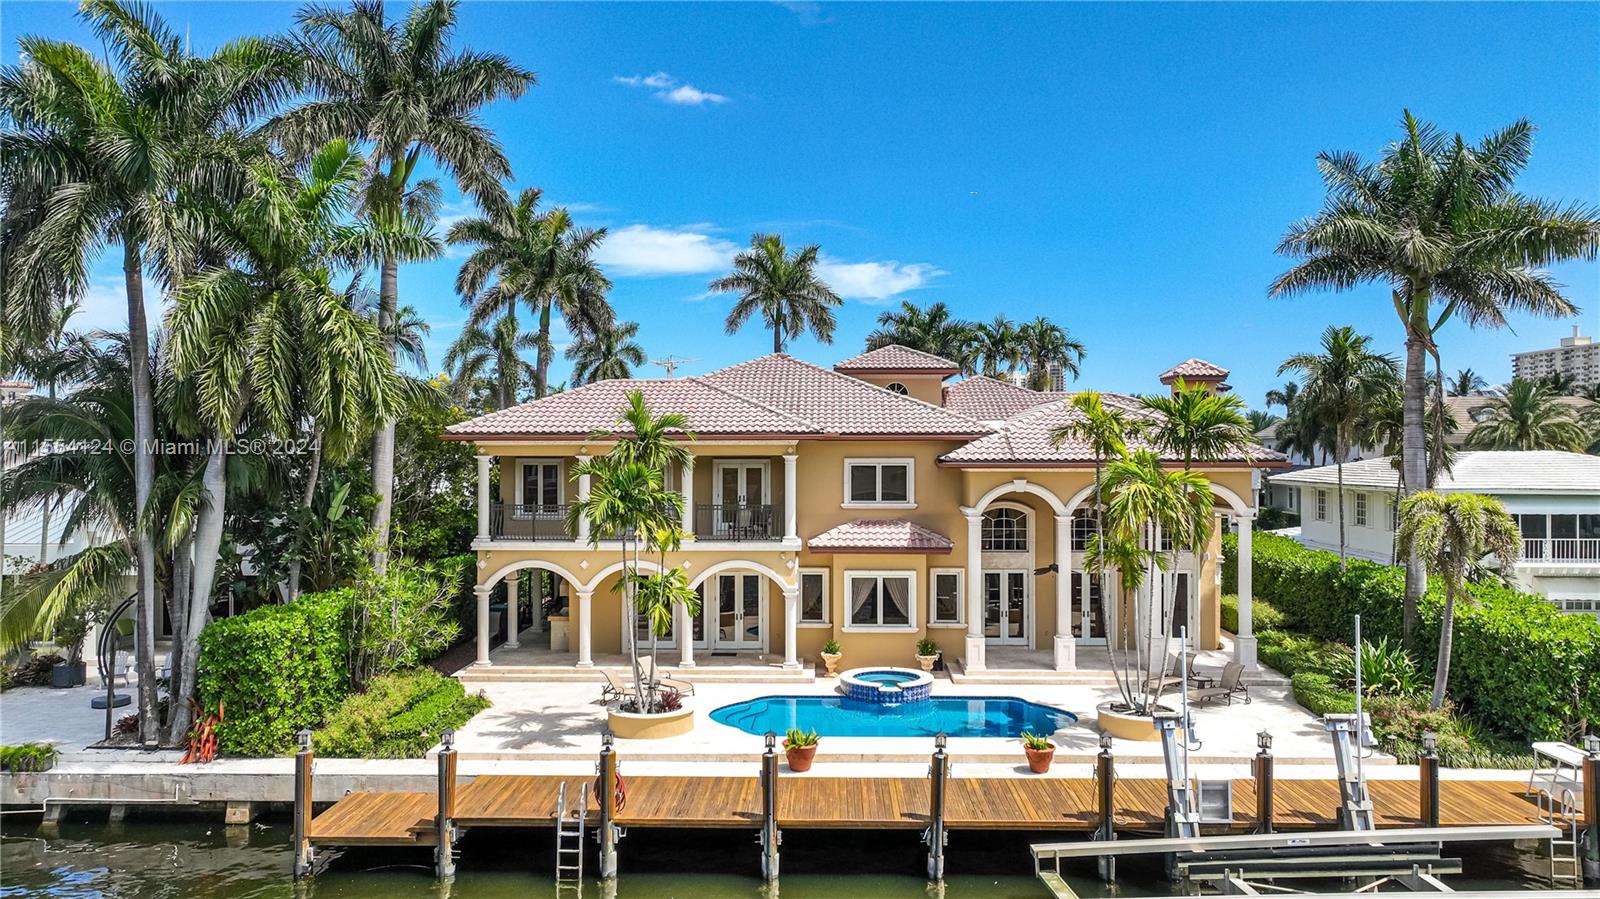 FIRST TIME ON THE MARKET.Beautiful waterfront Mediterranean Villa with 100ft of ocean access.Located in the prestigious island of Royal Palm Dr.high quality construction.7BD and 6/1BA.30ft High ceiling with ample natural light throughout creates a warm atmosphere.great floor plan.spacious Master bedroom with panoramic balcony waterview.Master bath with steam shower.Stunning living room with grand fireplace overlooking the pool and canal.Oversize family room & kitchen.Elegant entrance with impressive staircase
3 cars garage.Impact windows & doors.Lighting controls system.Great outdoor area.saltwater pool/spa.15,000 lbs boat Lift.wide/deeper canal on Las Olas islands.Private security patrol.Walk to Las Olas restaurants & upscale shopping.underground utilities,natural gas & higher elevations